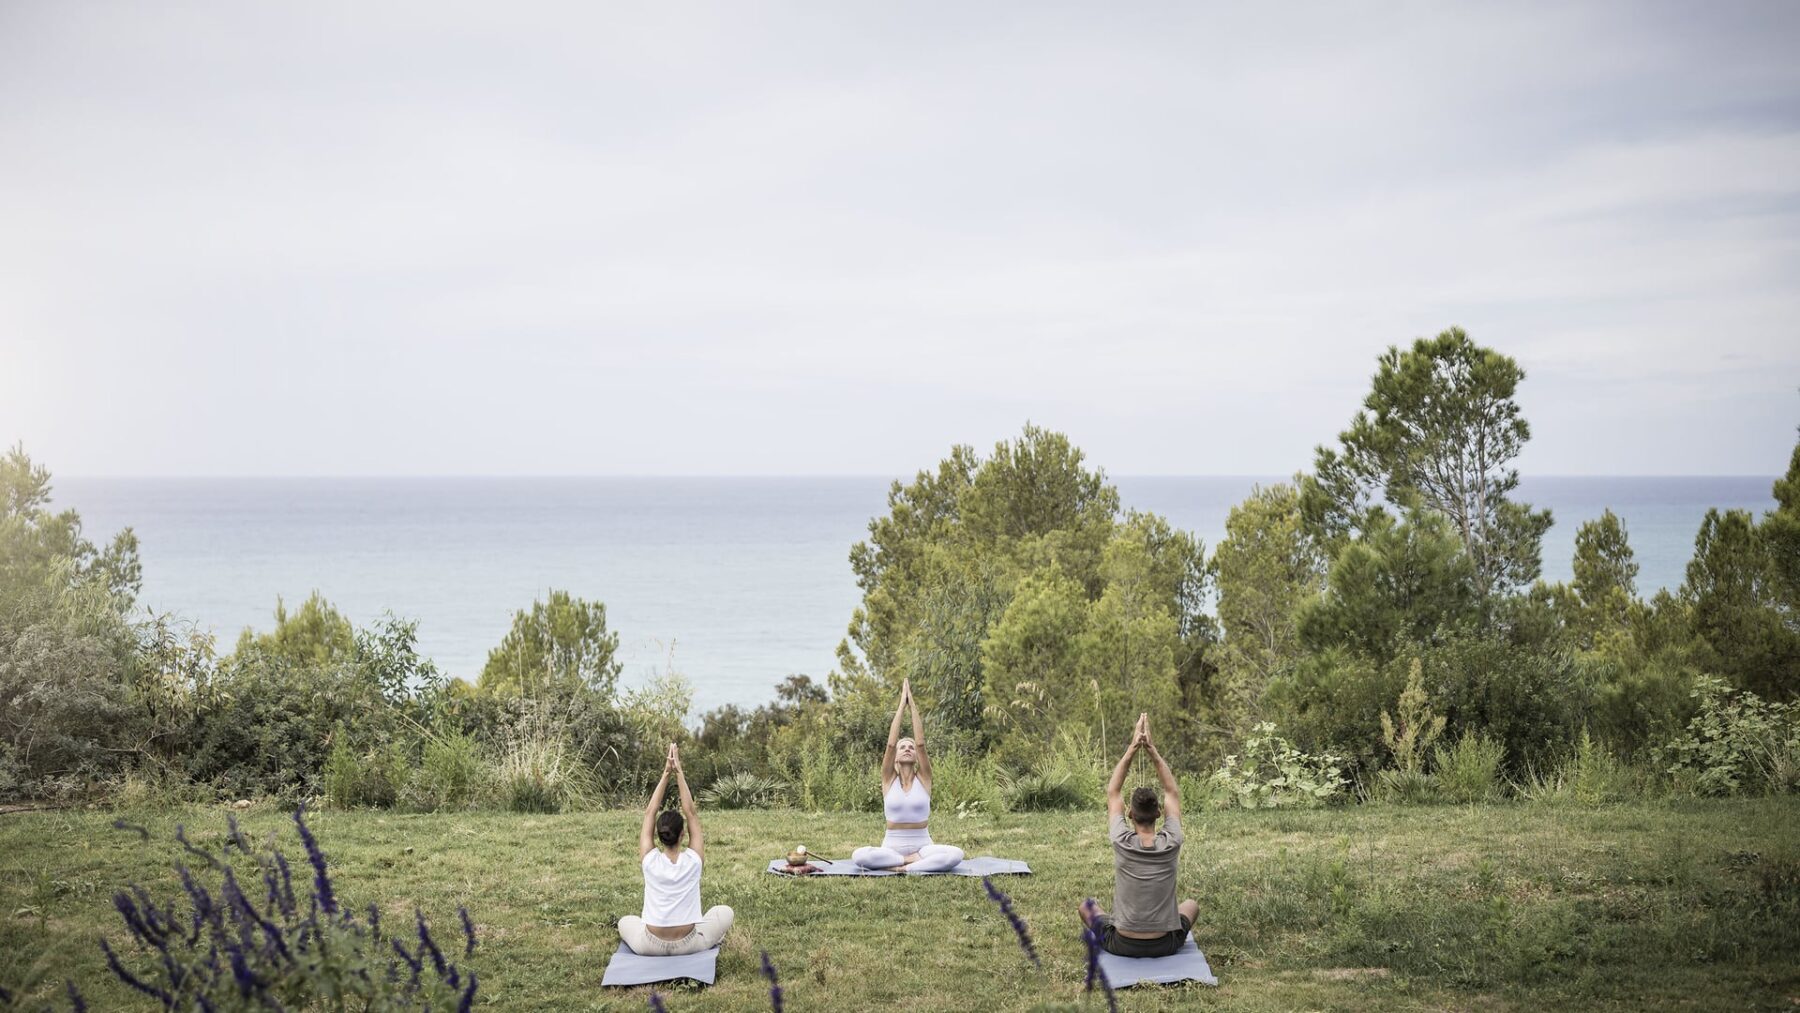 The heart of yoga in Napa Valley